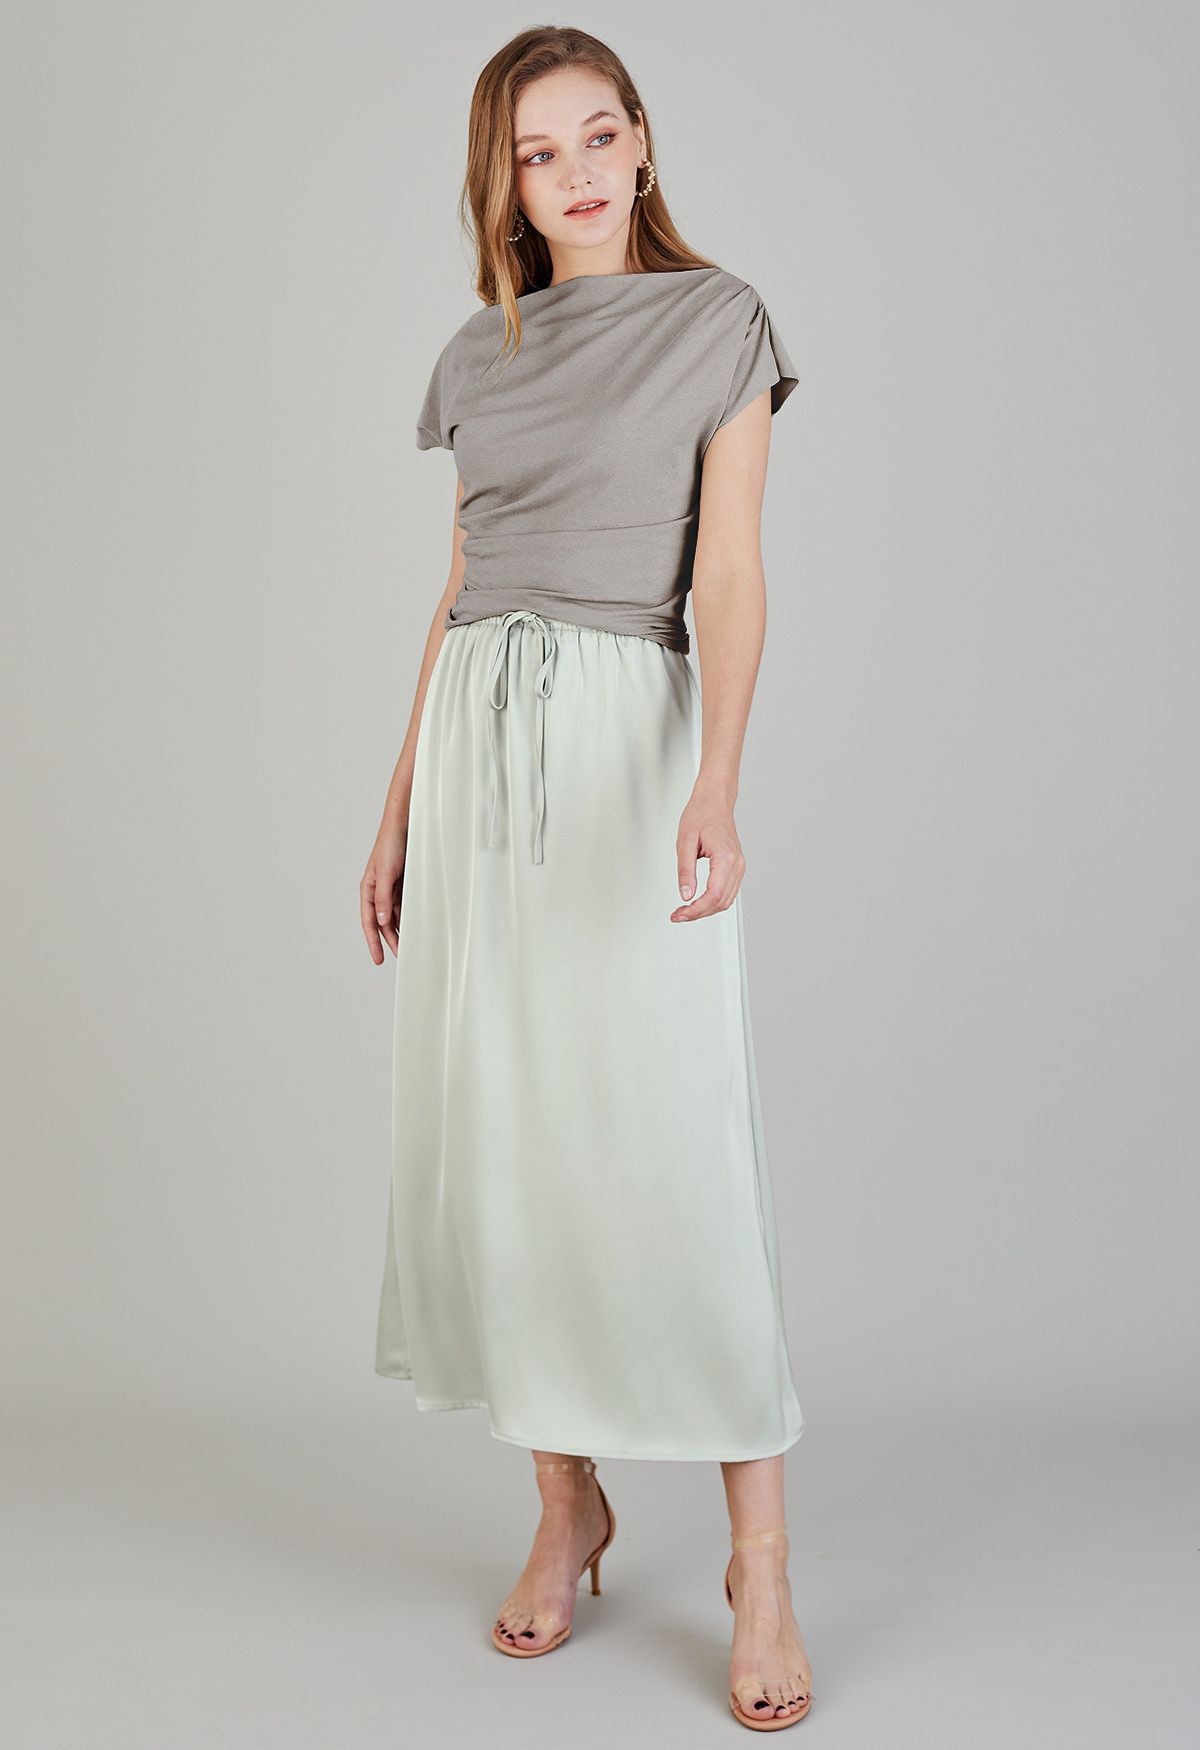 Asymmetric Boat Neck Ruched Top in Taupe